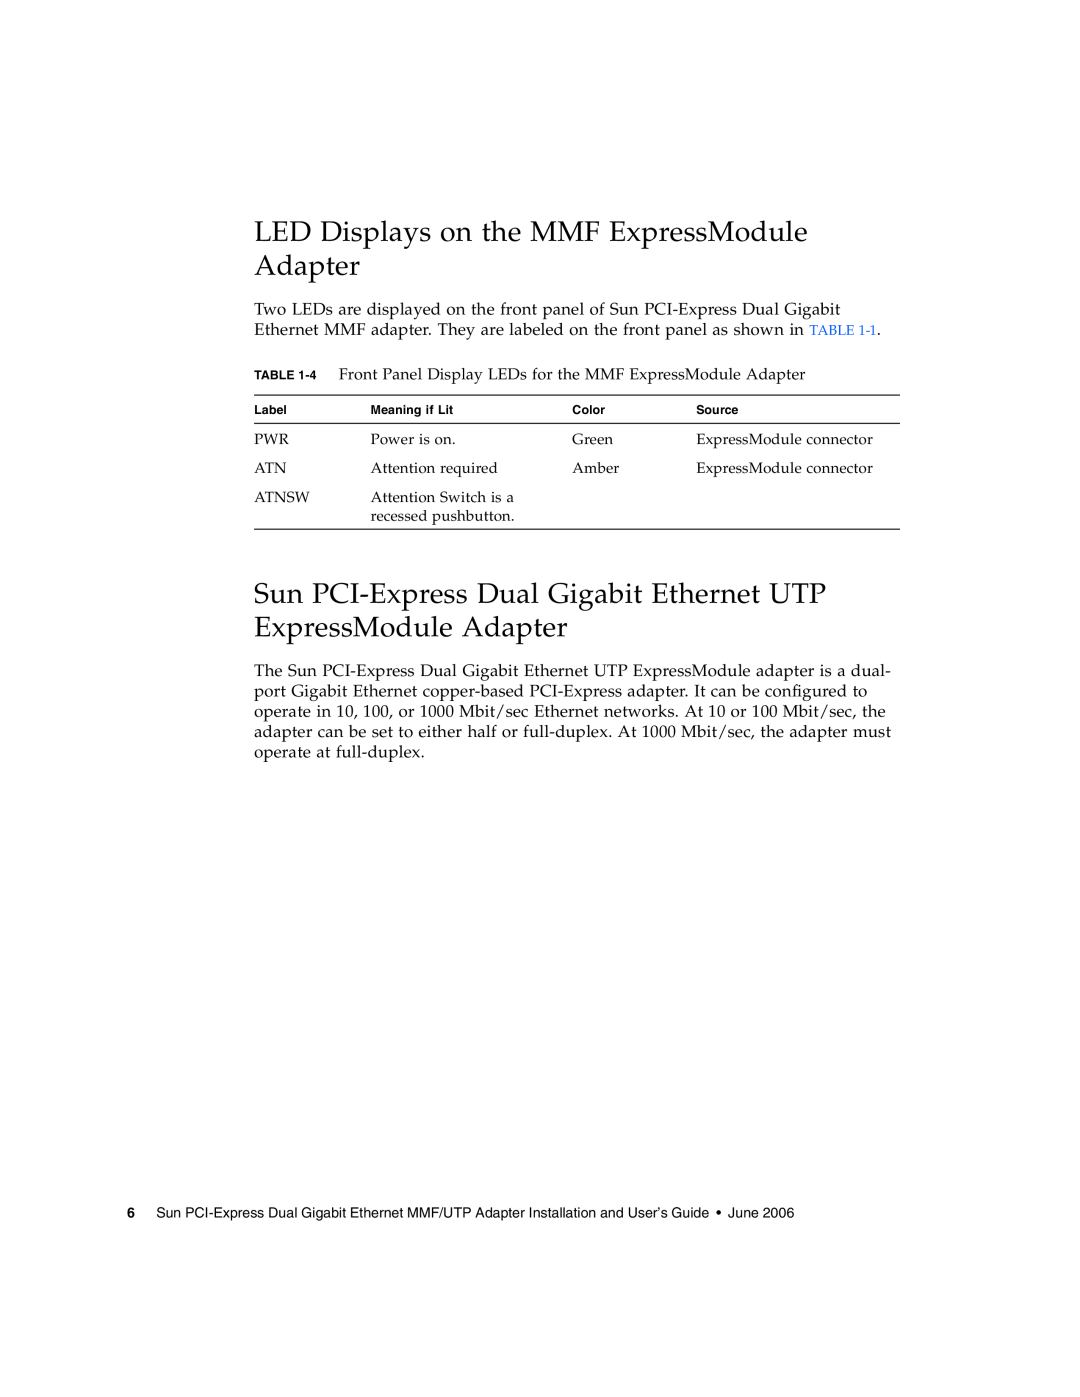 Sun Microsystems Gigabit Ethernet MMF/UTP Adapter manual LED Displays on the MMF ExpressModule Adapter 